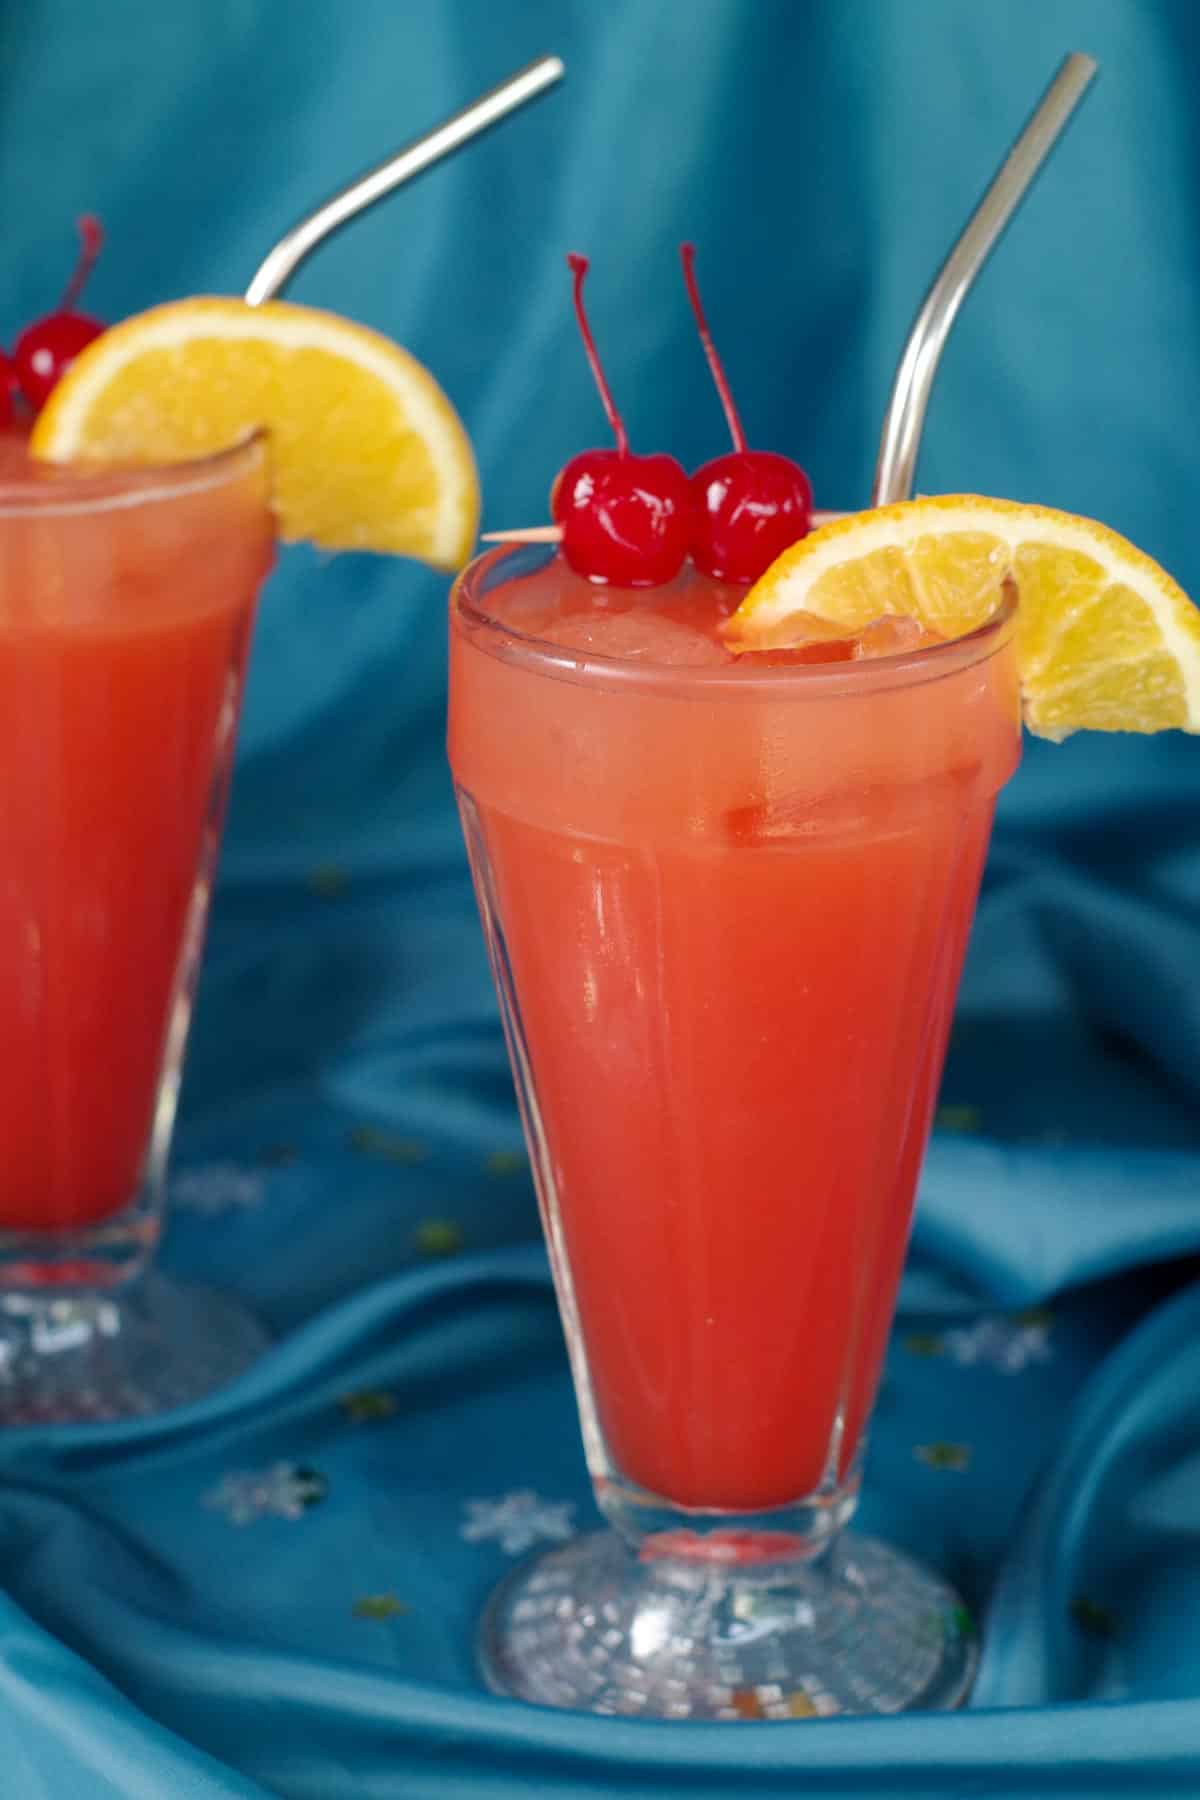 2 glasses of Shirley Temple drinks on blue material surface